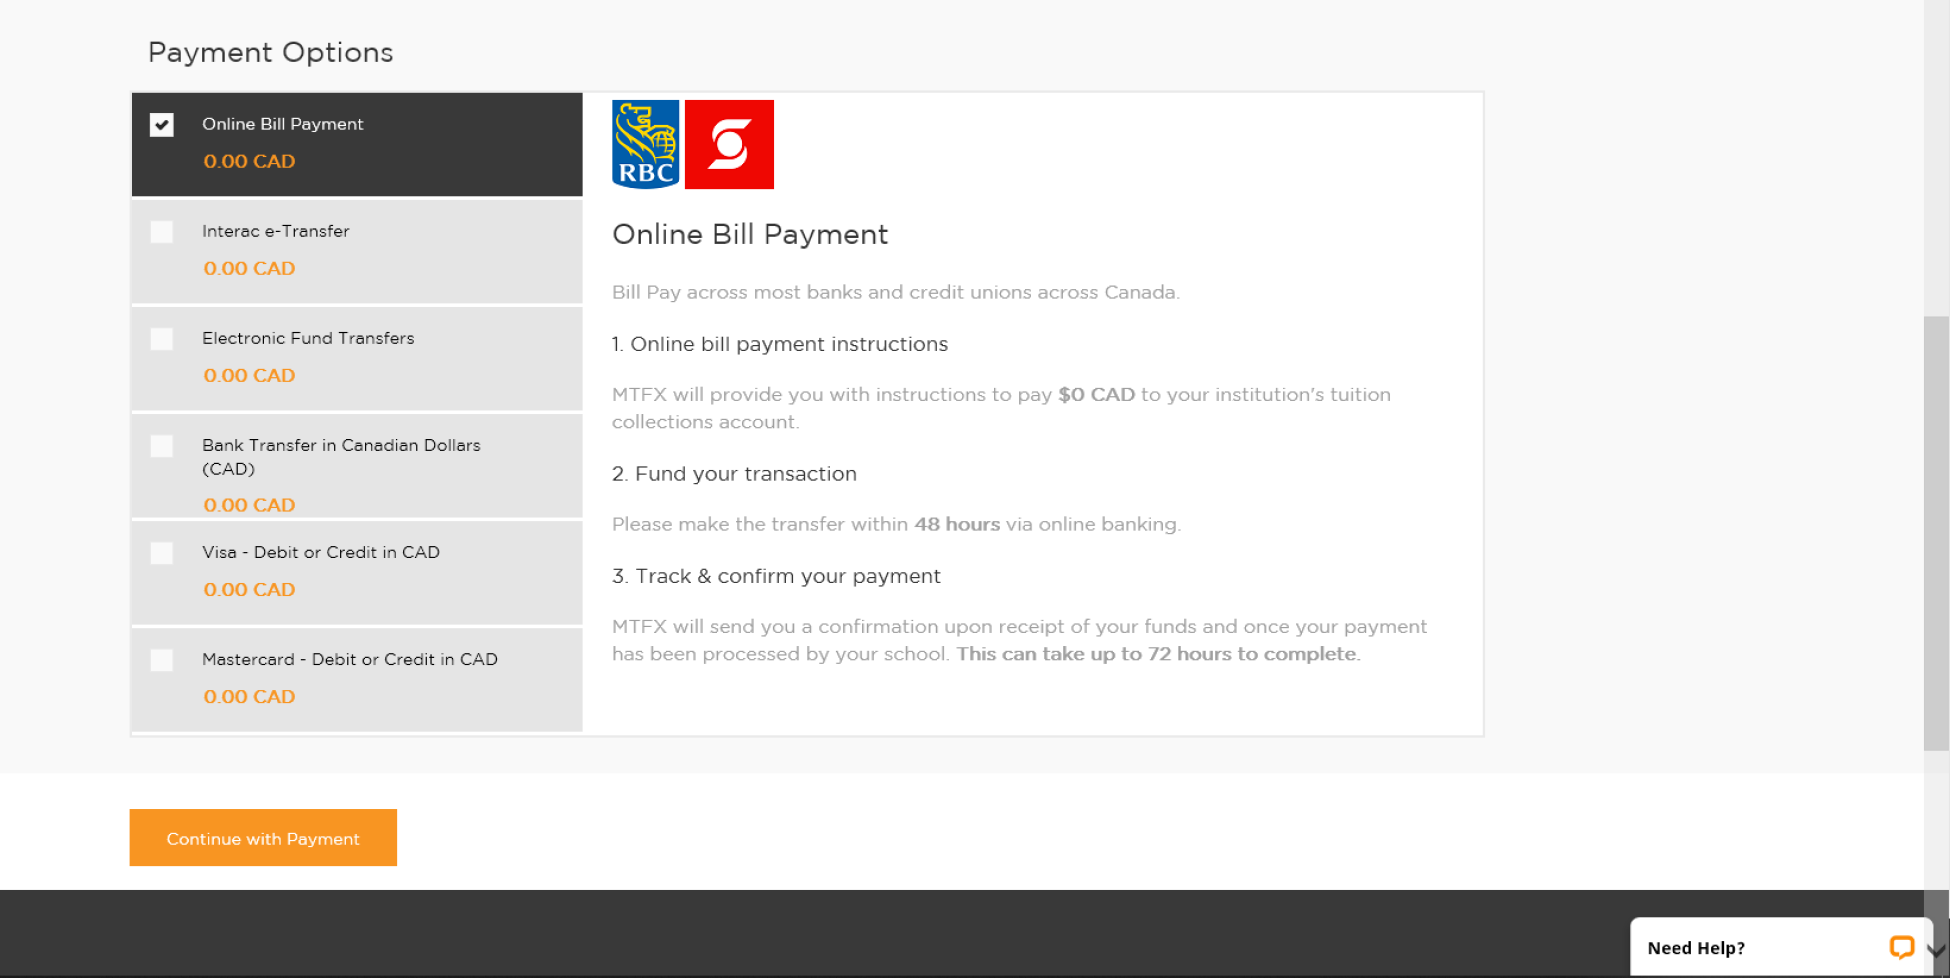 The left hand column of this screen shows payment options: Online Bill Payment, Interact e-Transfer, Bank Transfer in Canadian Dollars, Visa- Debit or Credit in CAD, Mastercard- Debit or Credit in CAD.